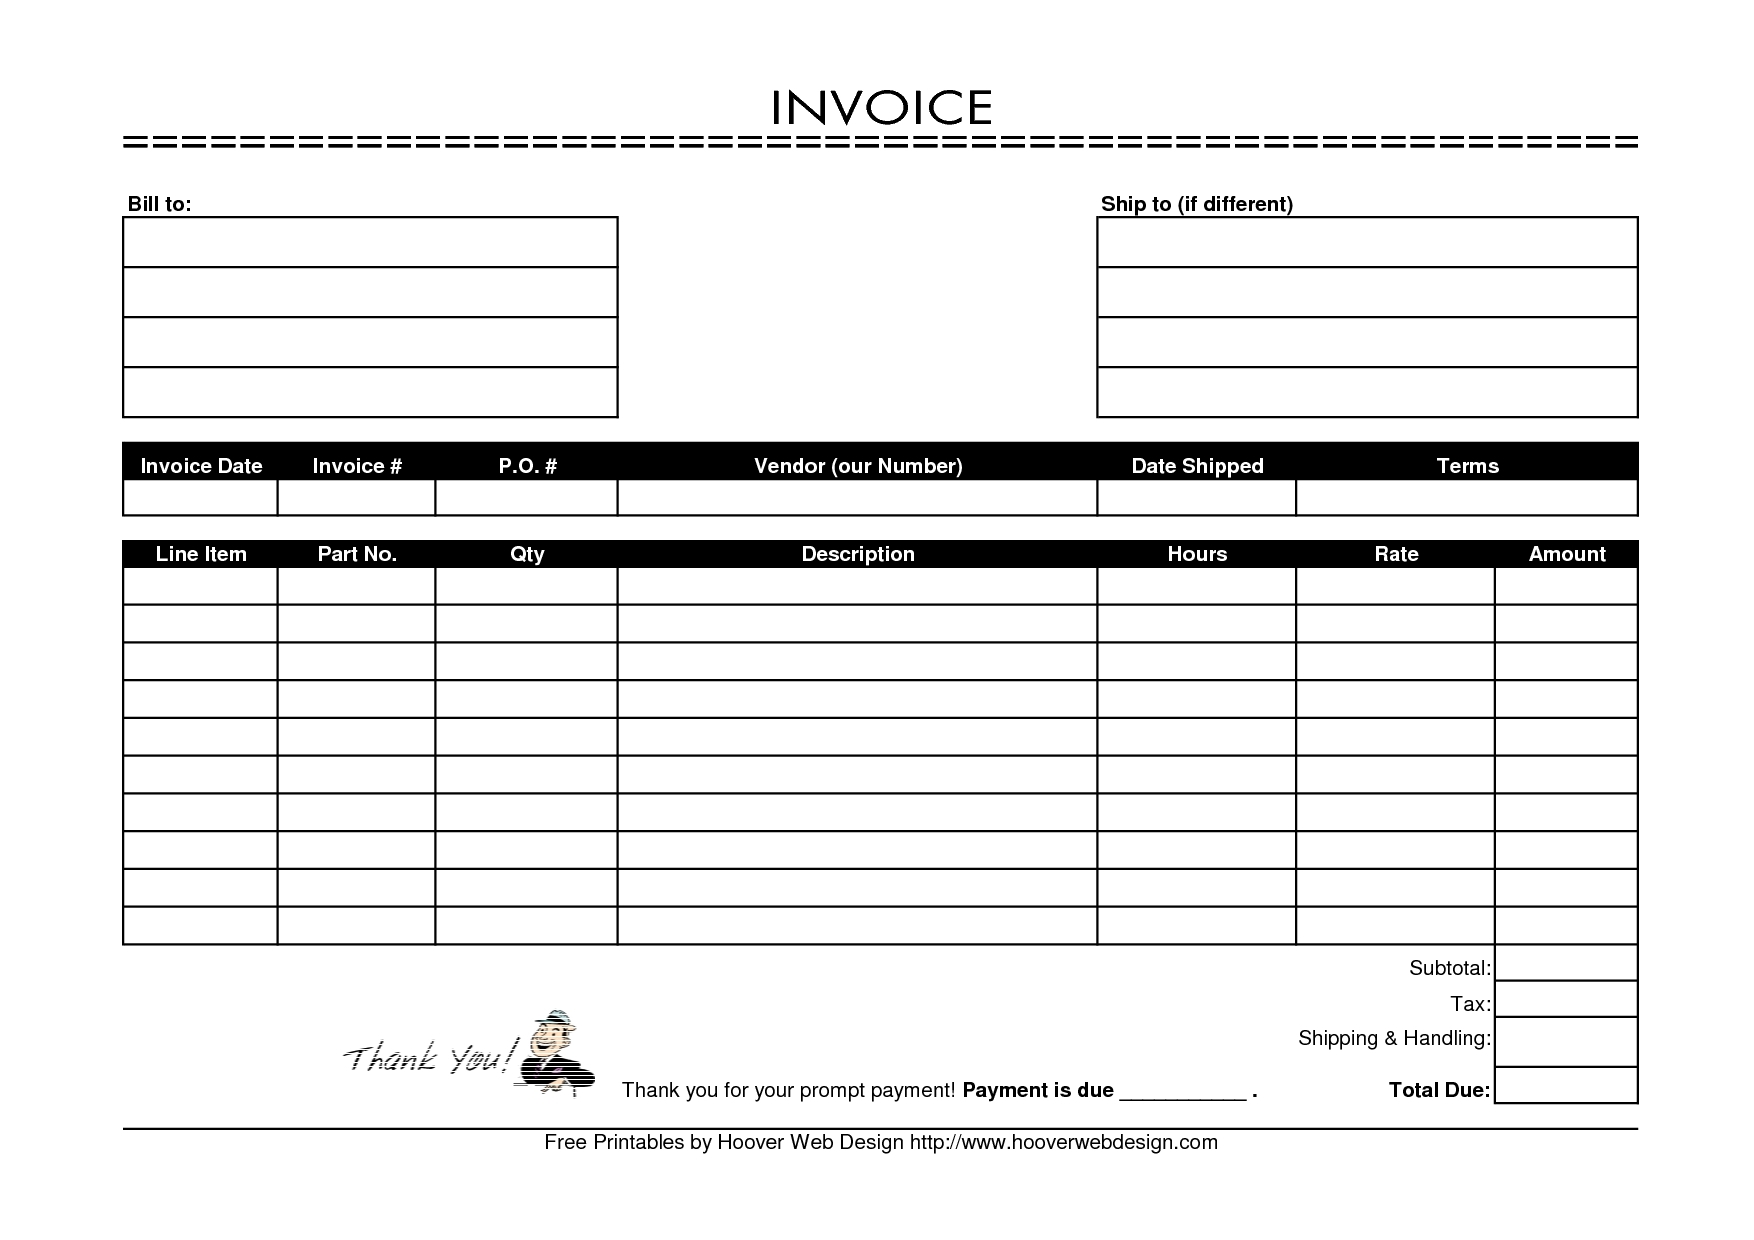 create invoice template in word